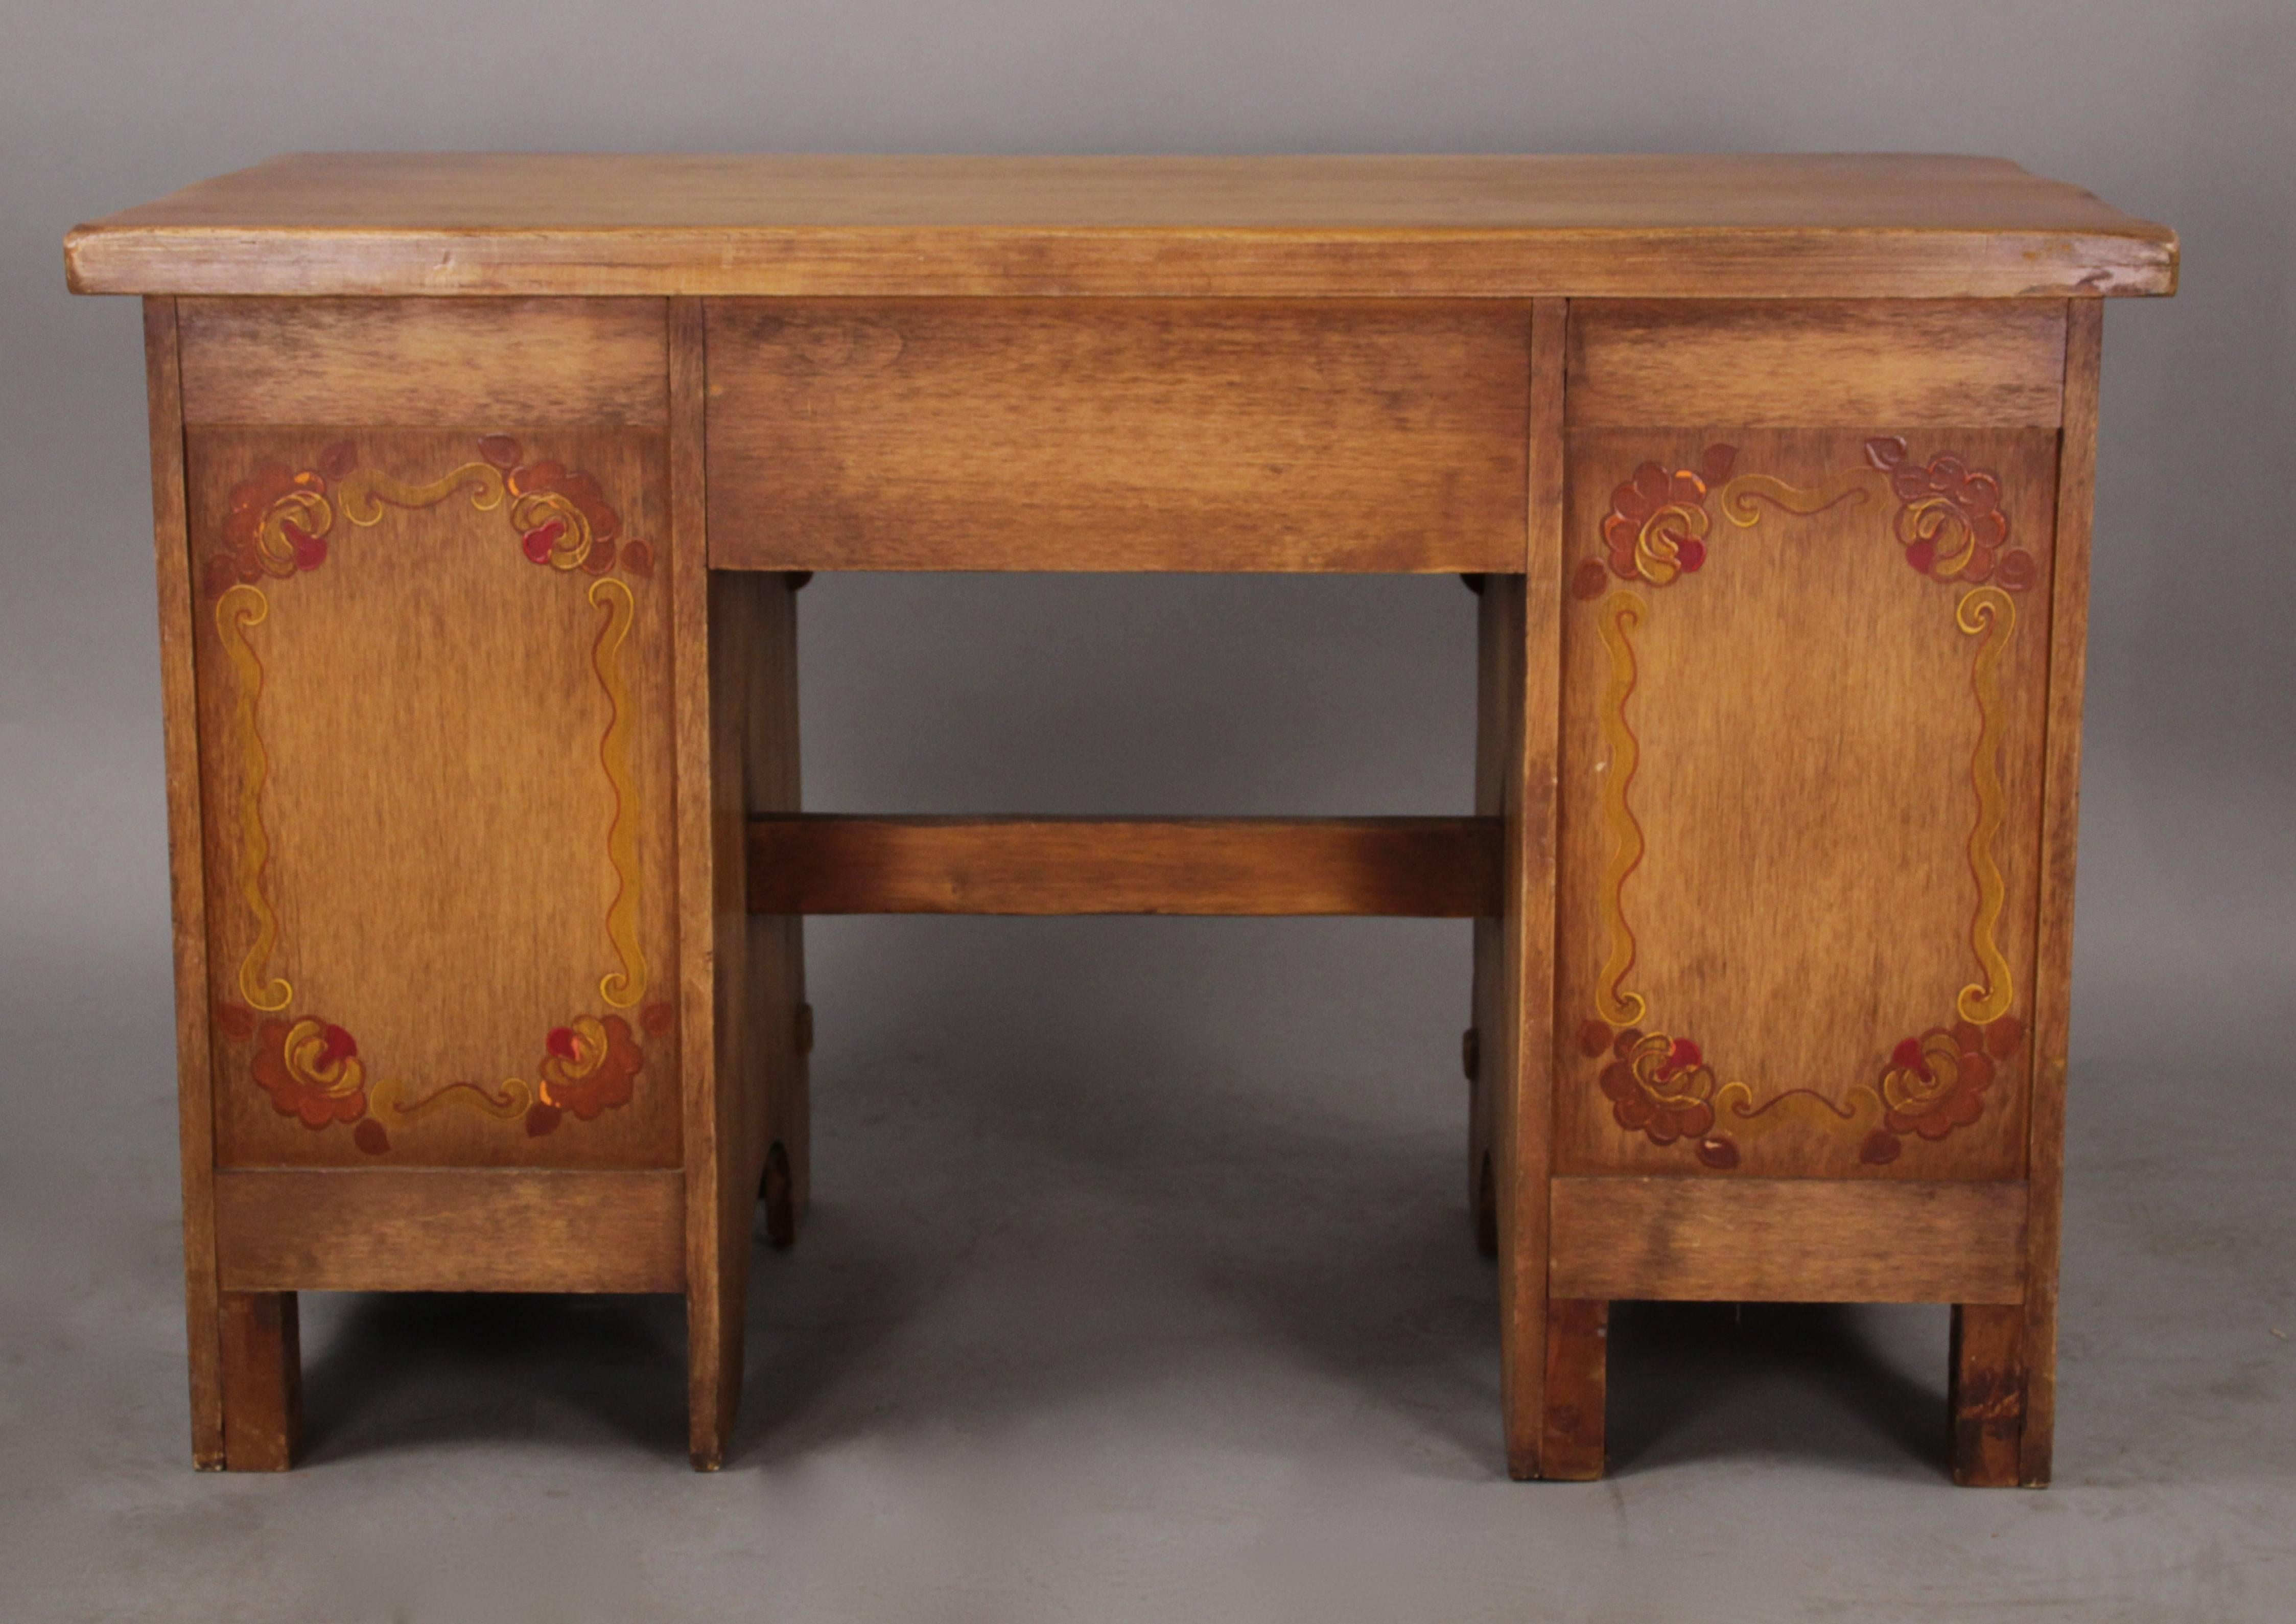 Desk with original finish and hand-painted decorations, circa 1930s.